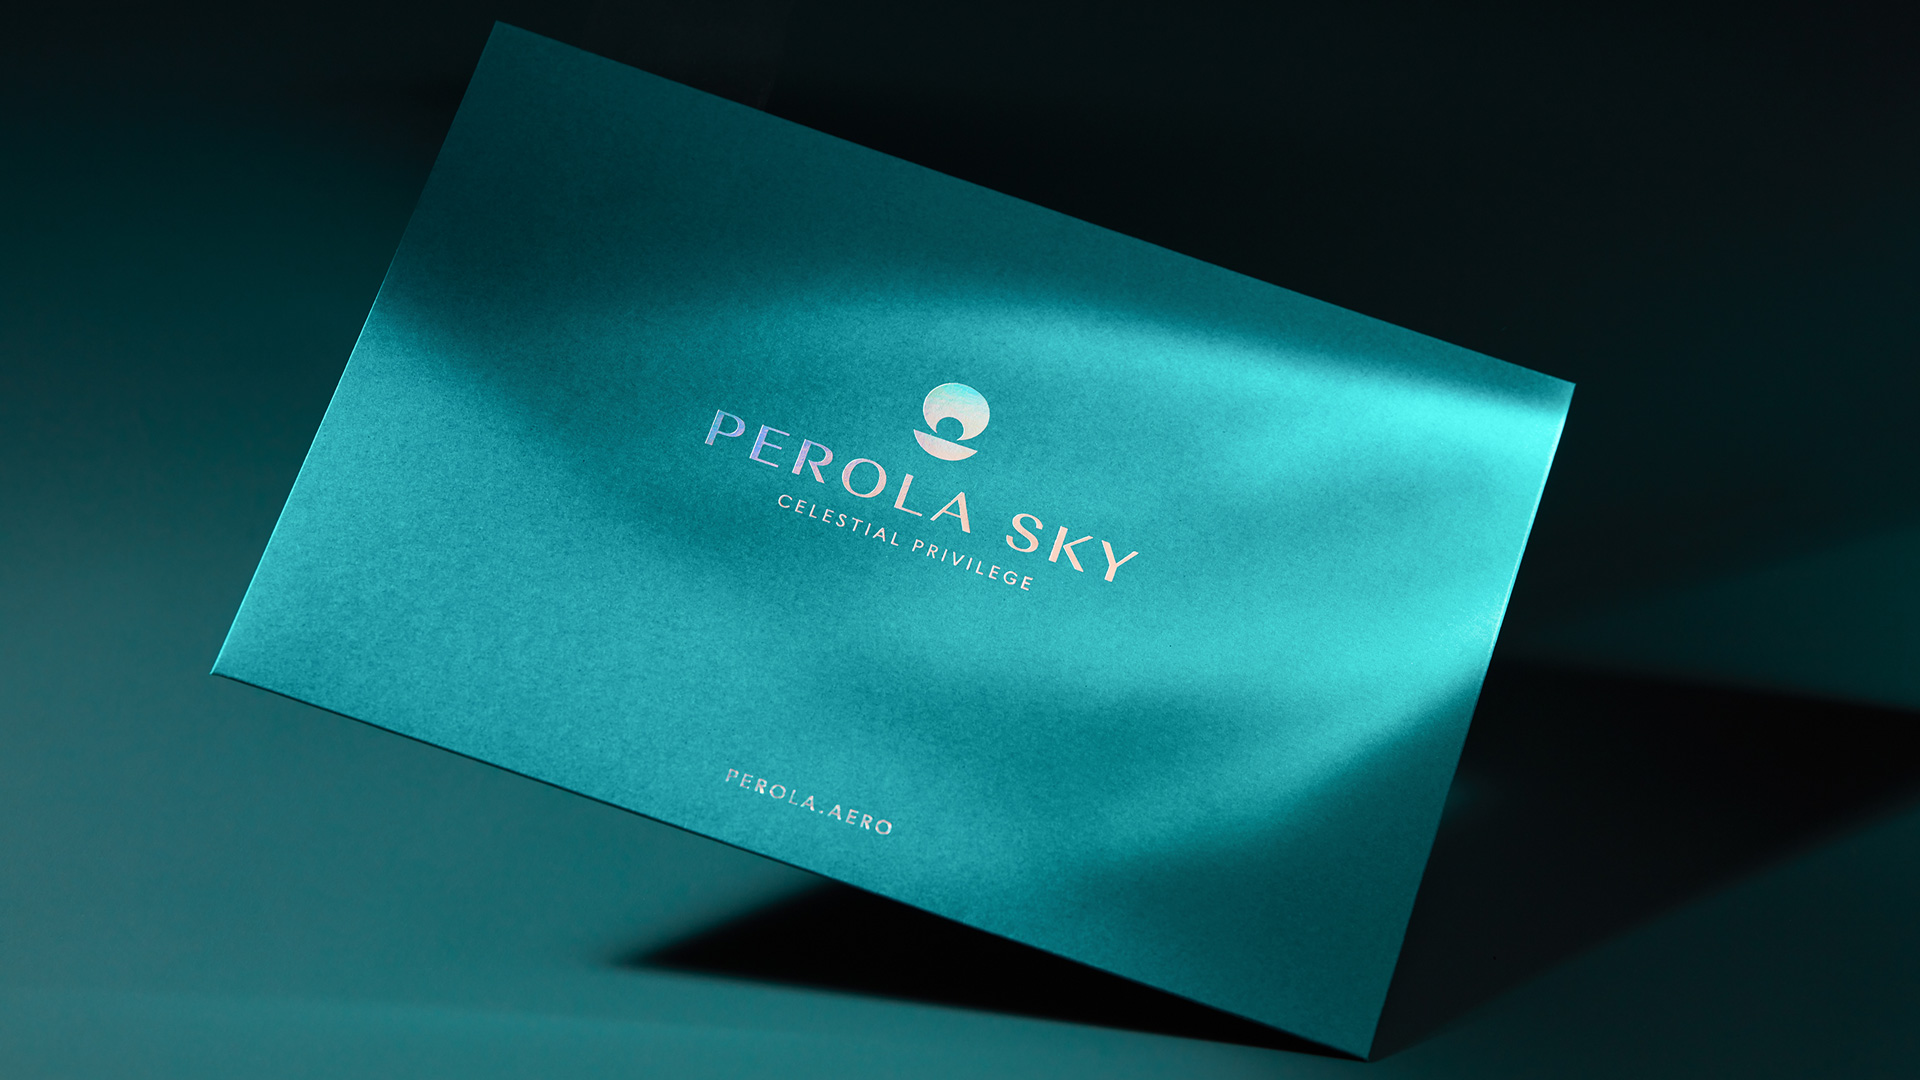 perola.aero  WE UNDERSTAND THE RHYTHM OF TODAY'S WORLD  That's why we've fine-tuned our work with trusted partners to conserve your most important resource — time.  These exclusive arrangements allow us to perform  flights unavailable to others and give you an unmatched degree of freedom to be with those who matter,  and where you want to be.perola.aero

WE UNDERSTAND
THE RHYTHM
OF TODAY'S WORLD

That's why we've fine-tuned our work with trusted partners
to conserve your most important resource — time.

These exclusive arrangements allow us to perform

flights unavailable to others and give you an unmatched
degree of freedom to be with those who matter,

and where you want to be.